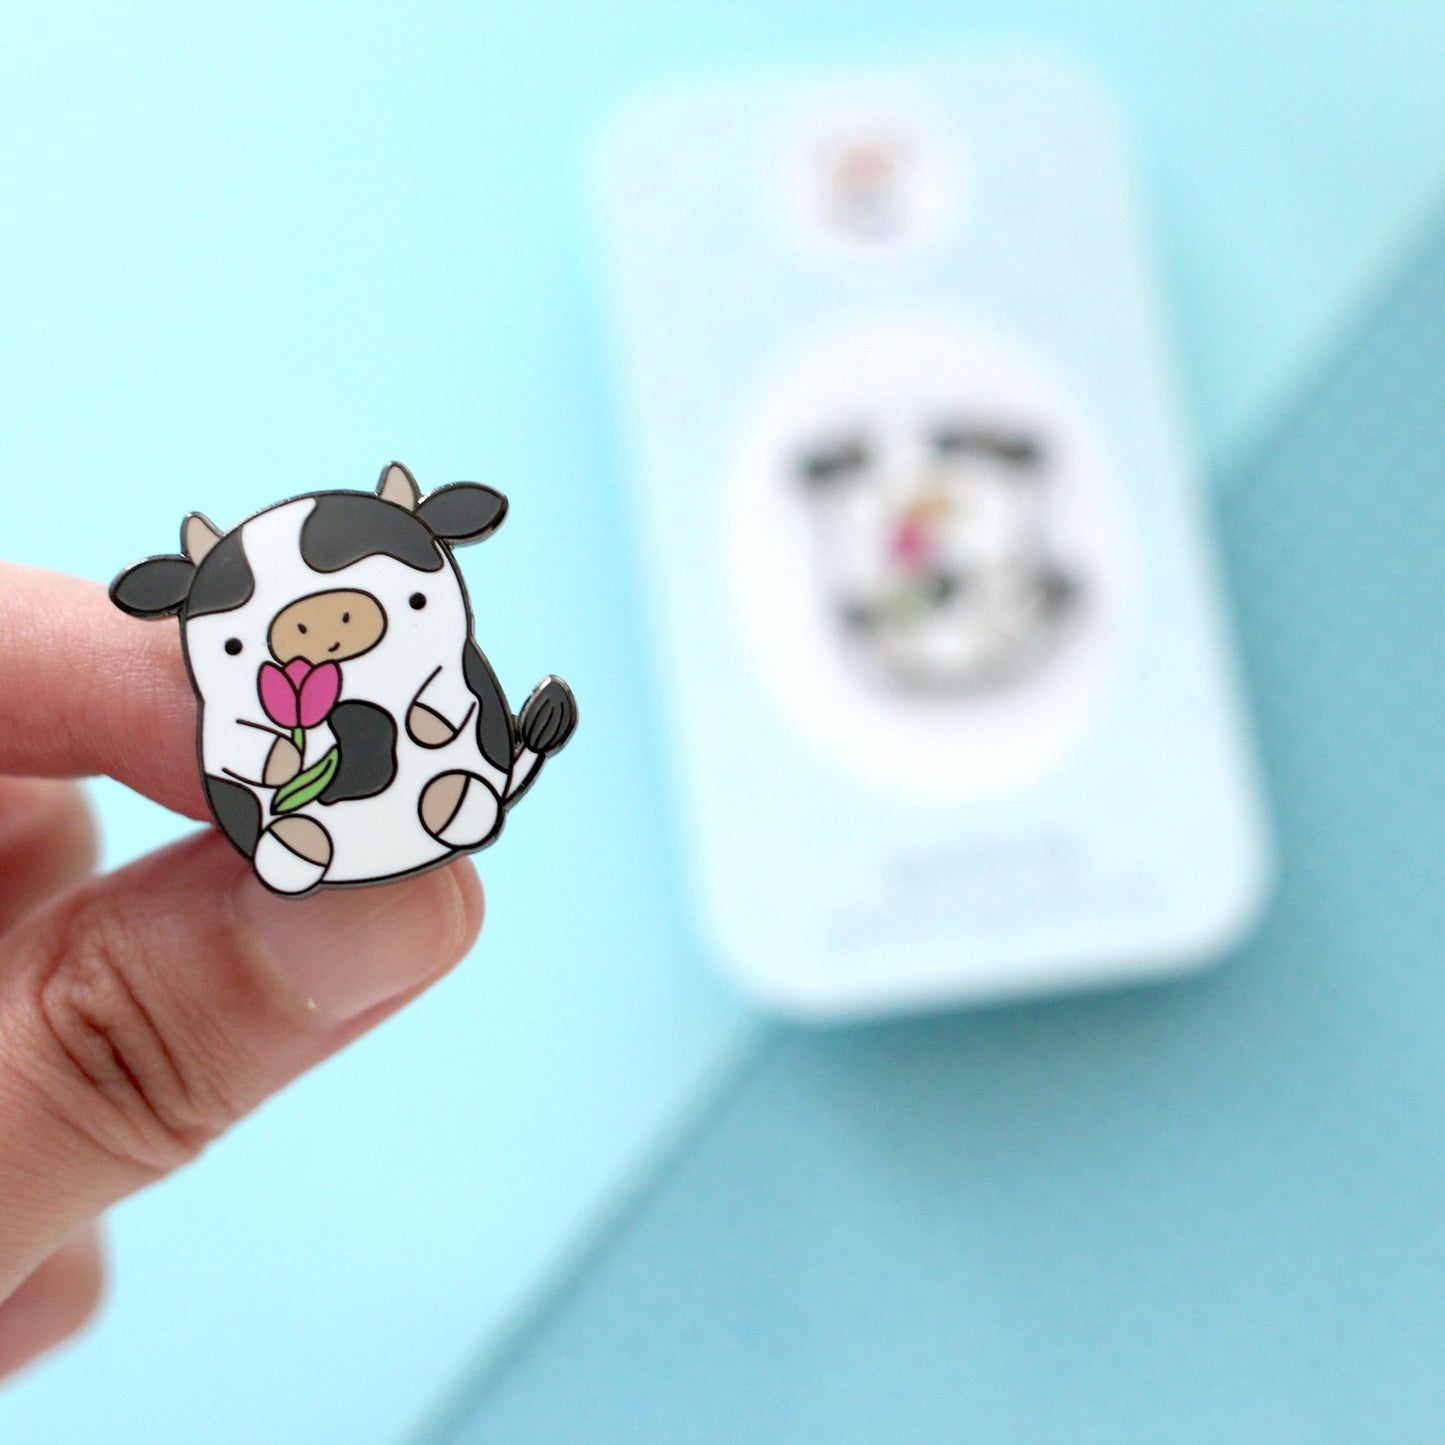 Cow Enamel Pin. Cute Cow Holding a Tulip. Kawaii Cow Pin by Wild Whimsy Woolies